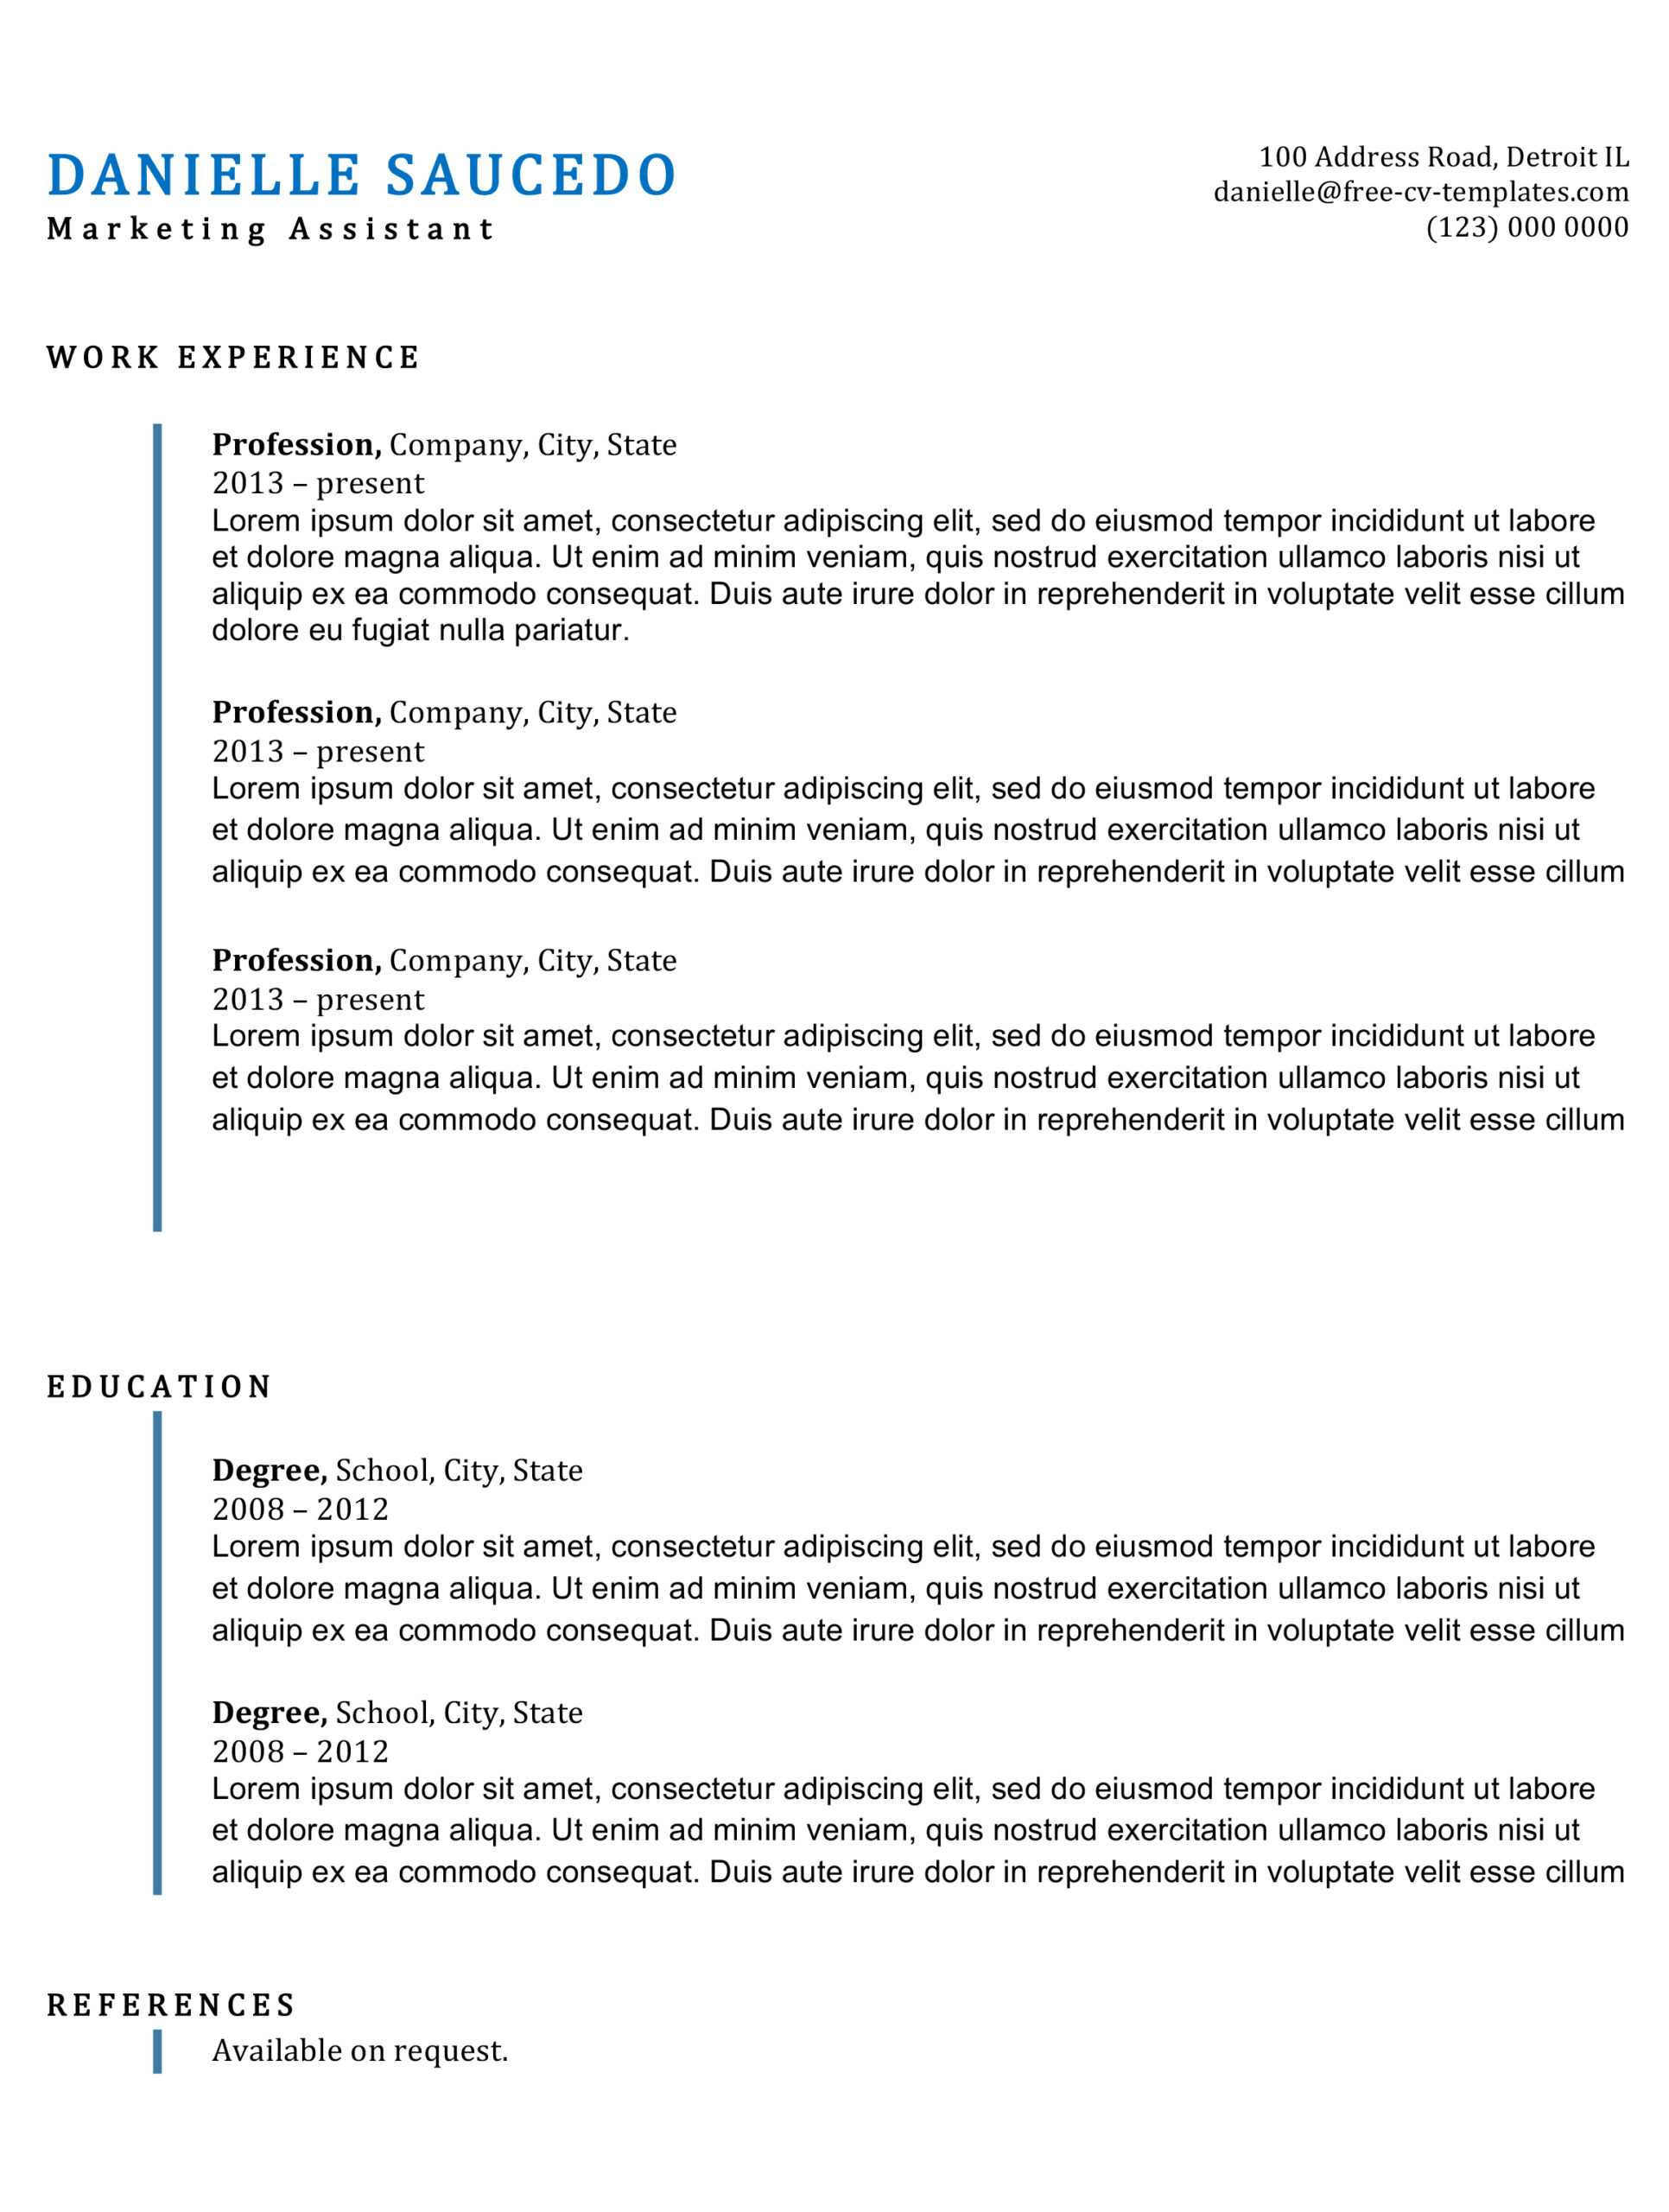 Traditional Cv Templates | Land The Job With Our Free Word Regarding Resume Templates Word 2013